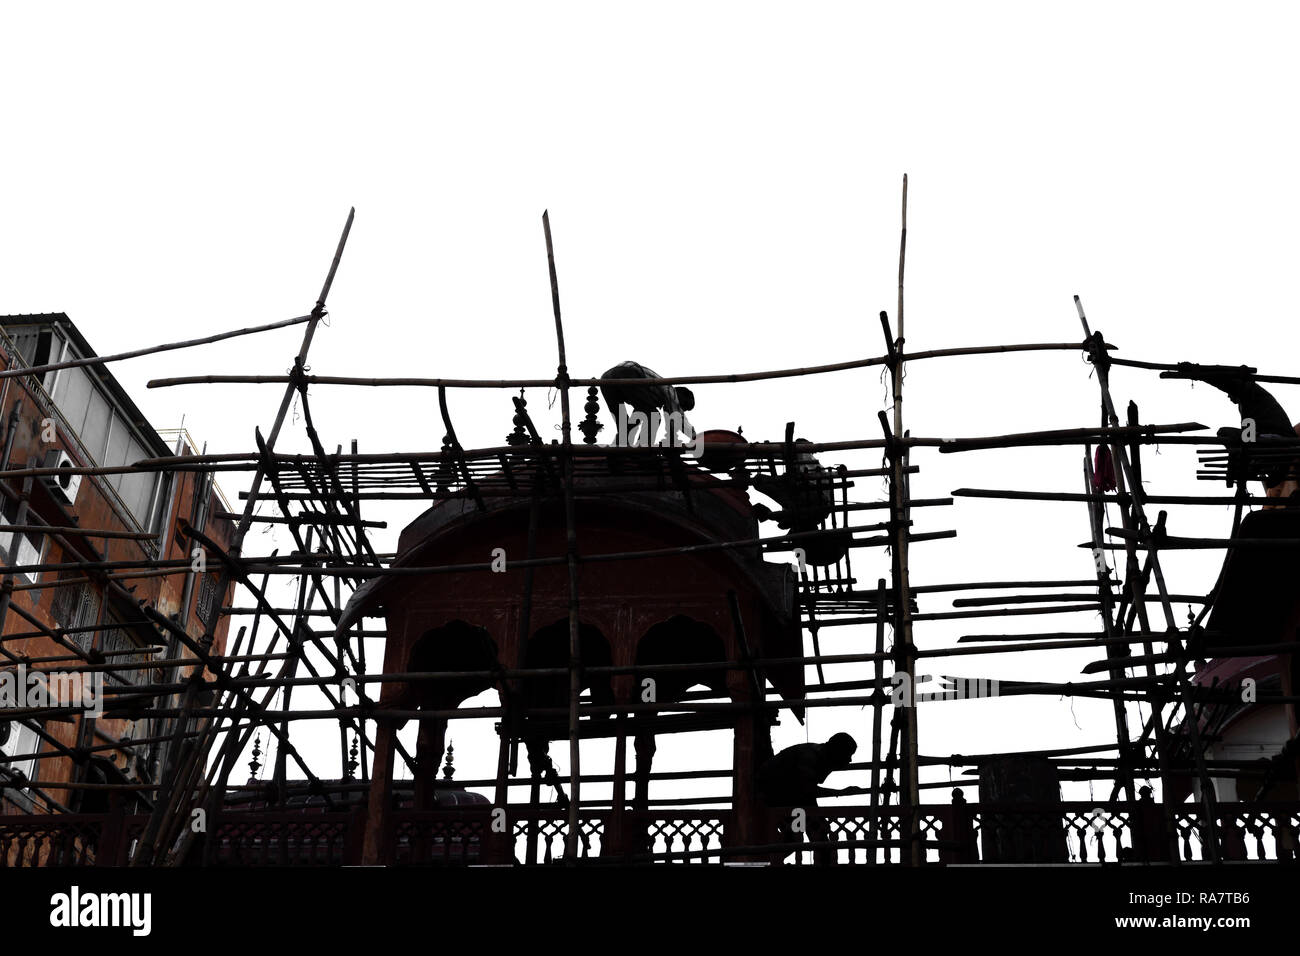 Woker silhouette on bamboo scaffold working on building contruction site. Stock Photo